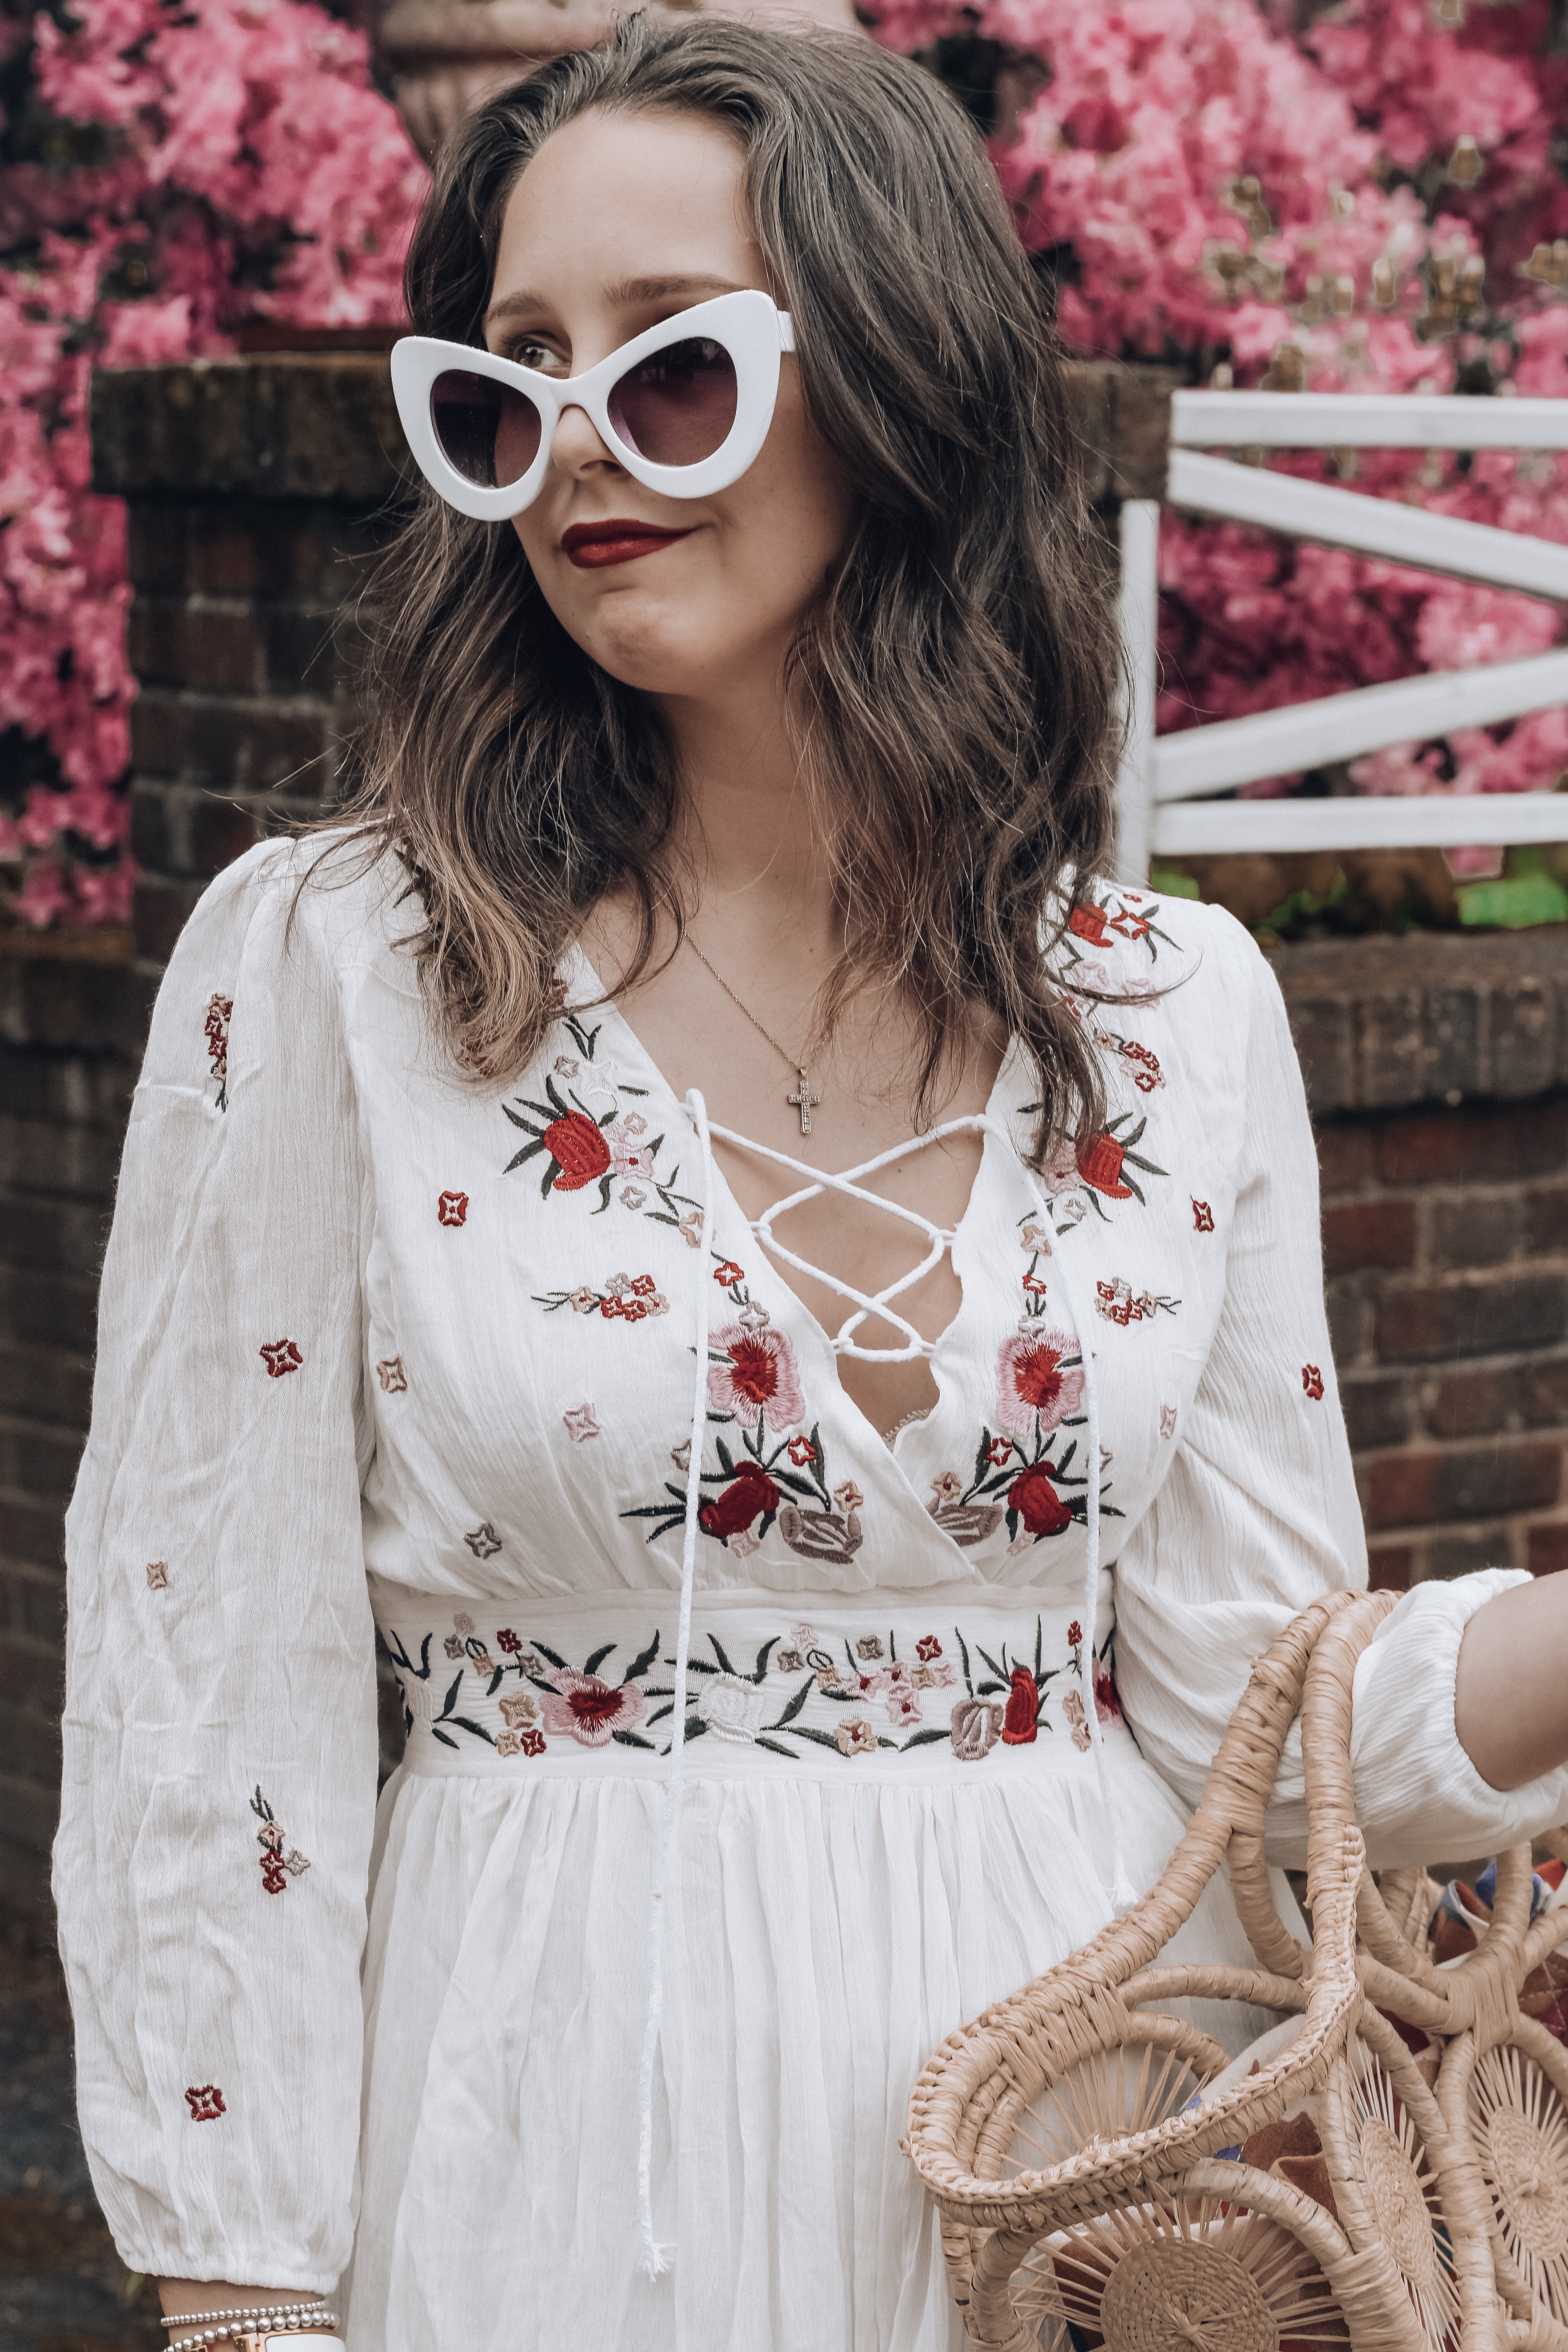 floral dress-embroidery- close up-fashion-shopping-new york-influencer